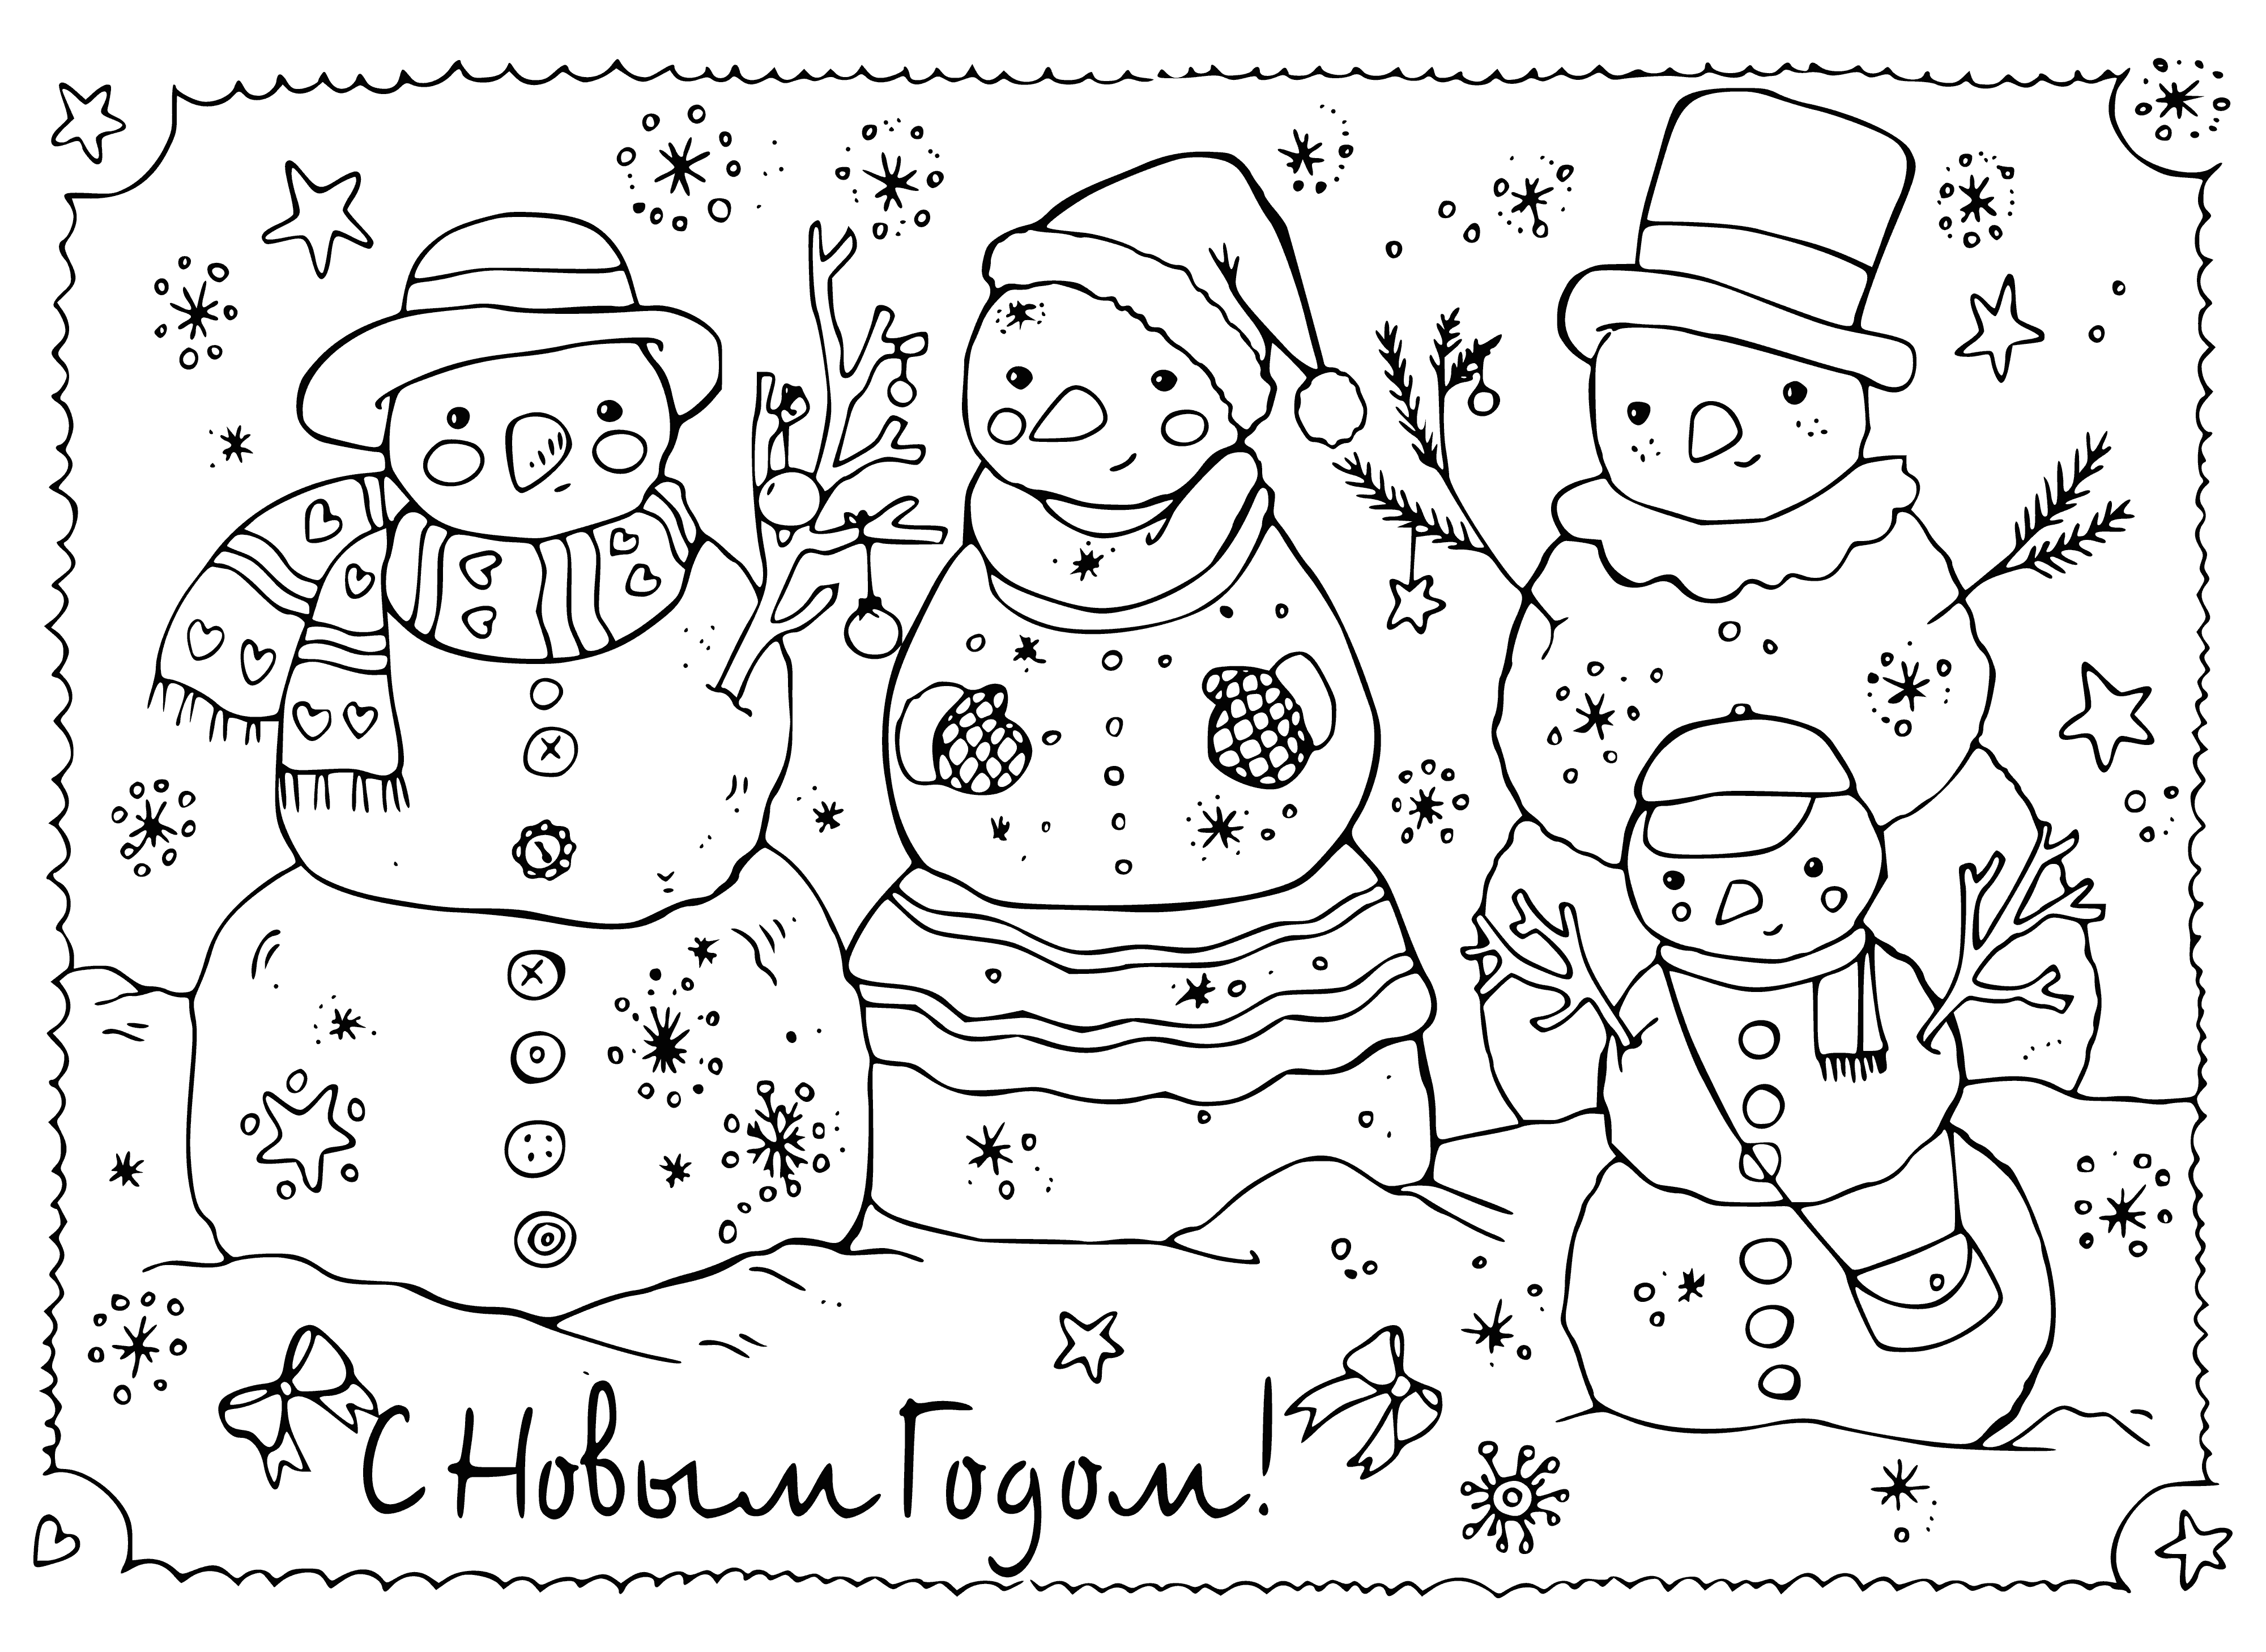 Snowman family coloring page